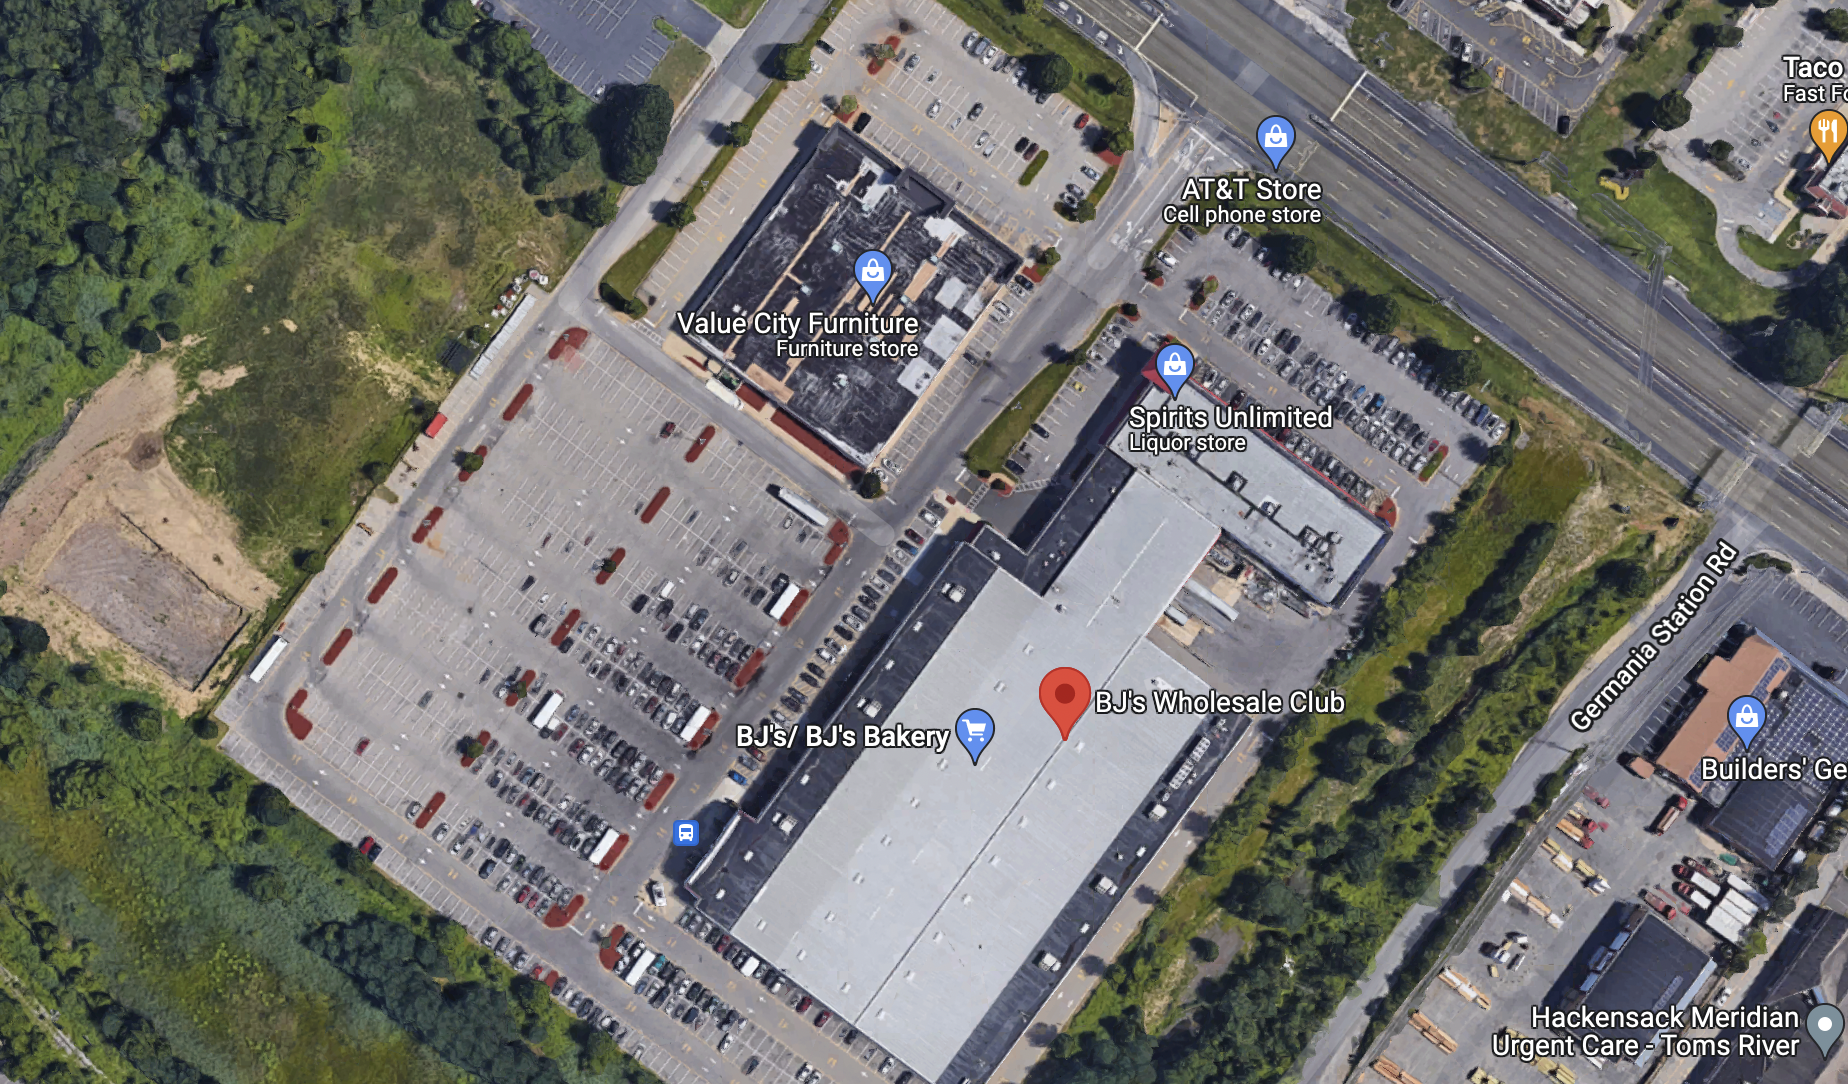 Filling stations will be installed in the parking lot behind the Value City Furniture store. (Credit: Google Earth)